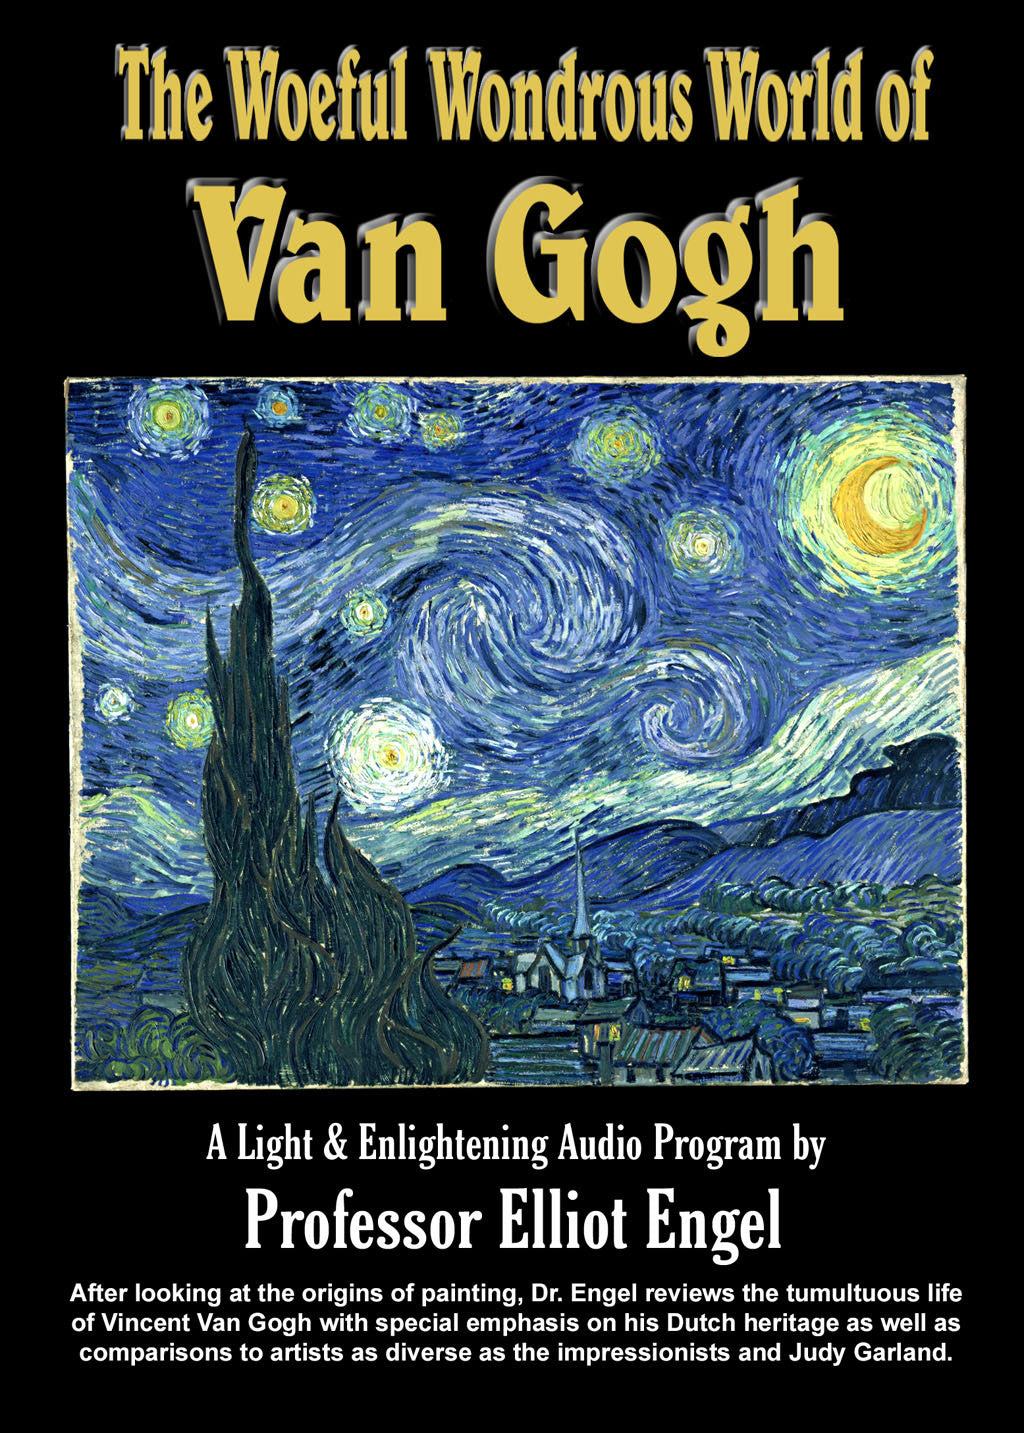 The Woeful and Wondrous World of Van Gogh